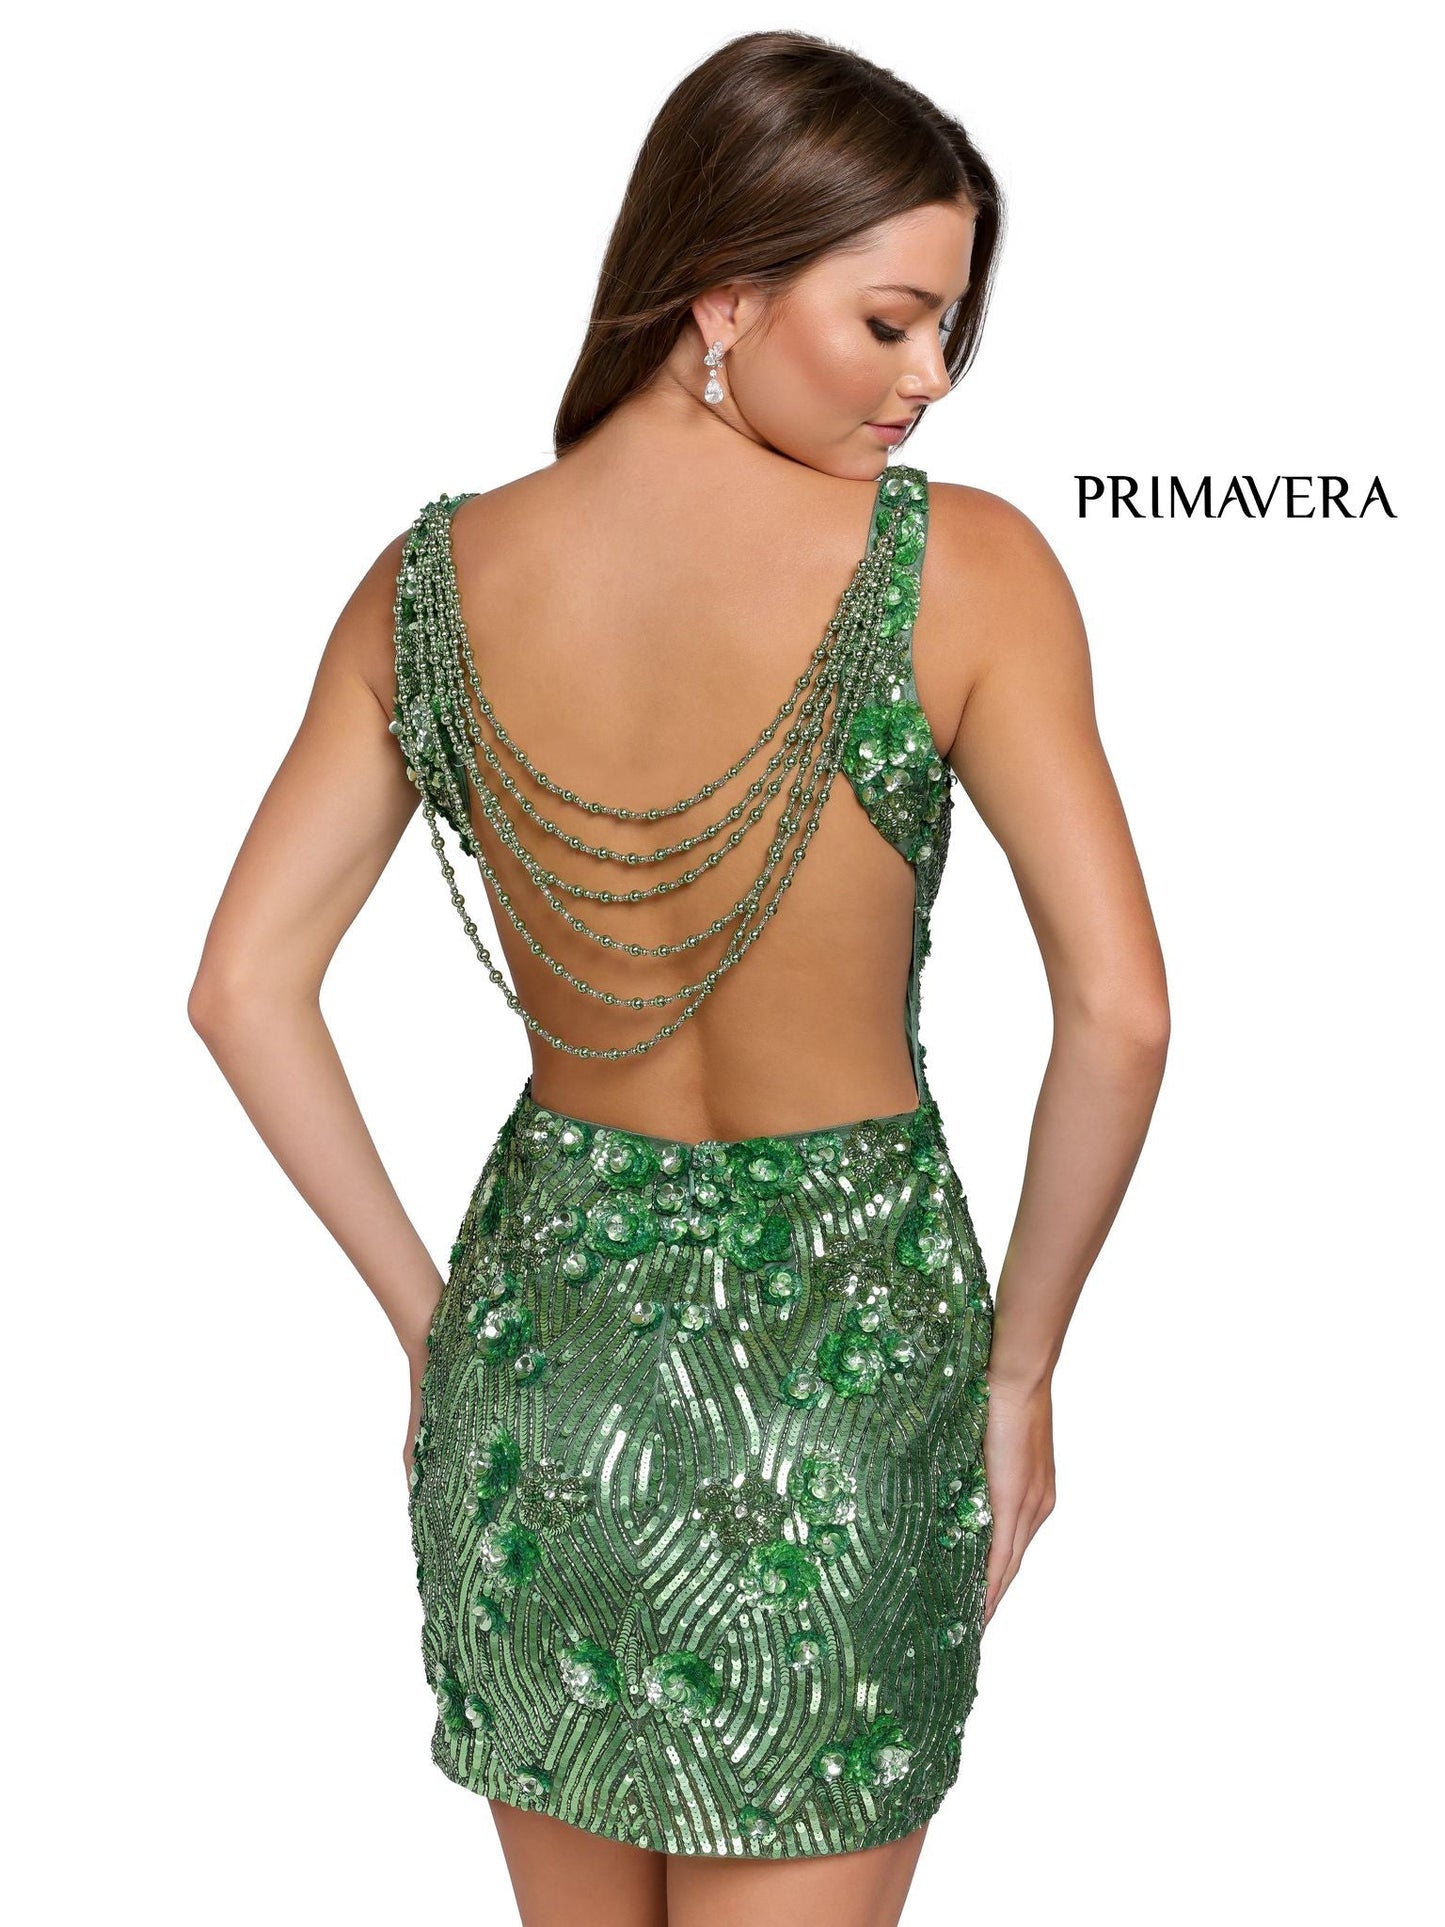 Primavera Couture 3850 size 8 Short vory Homecoming dress Fitted sequin beaded short cocktail dress